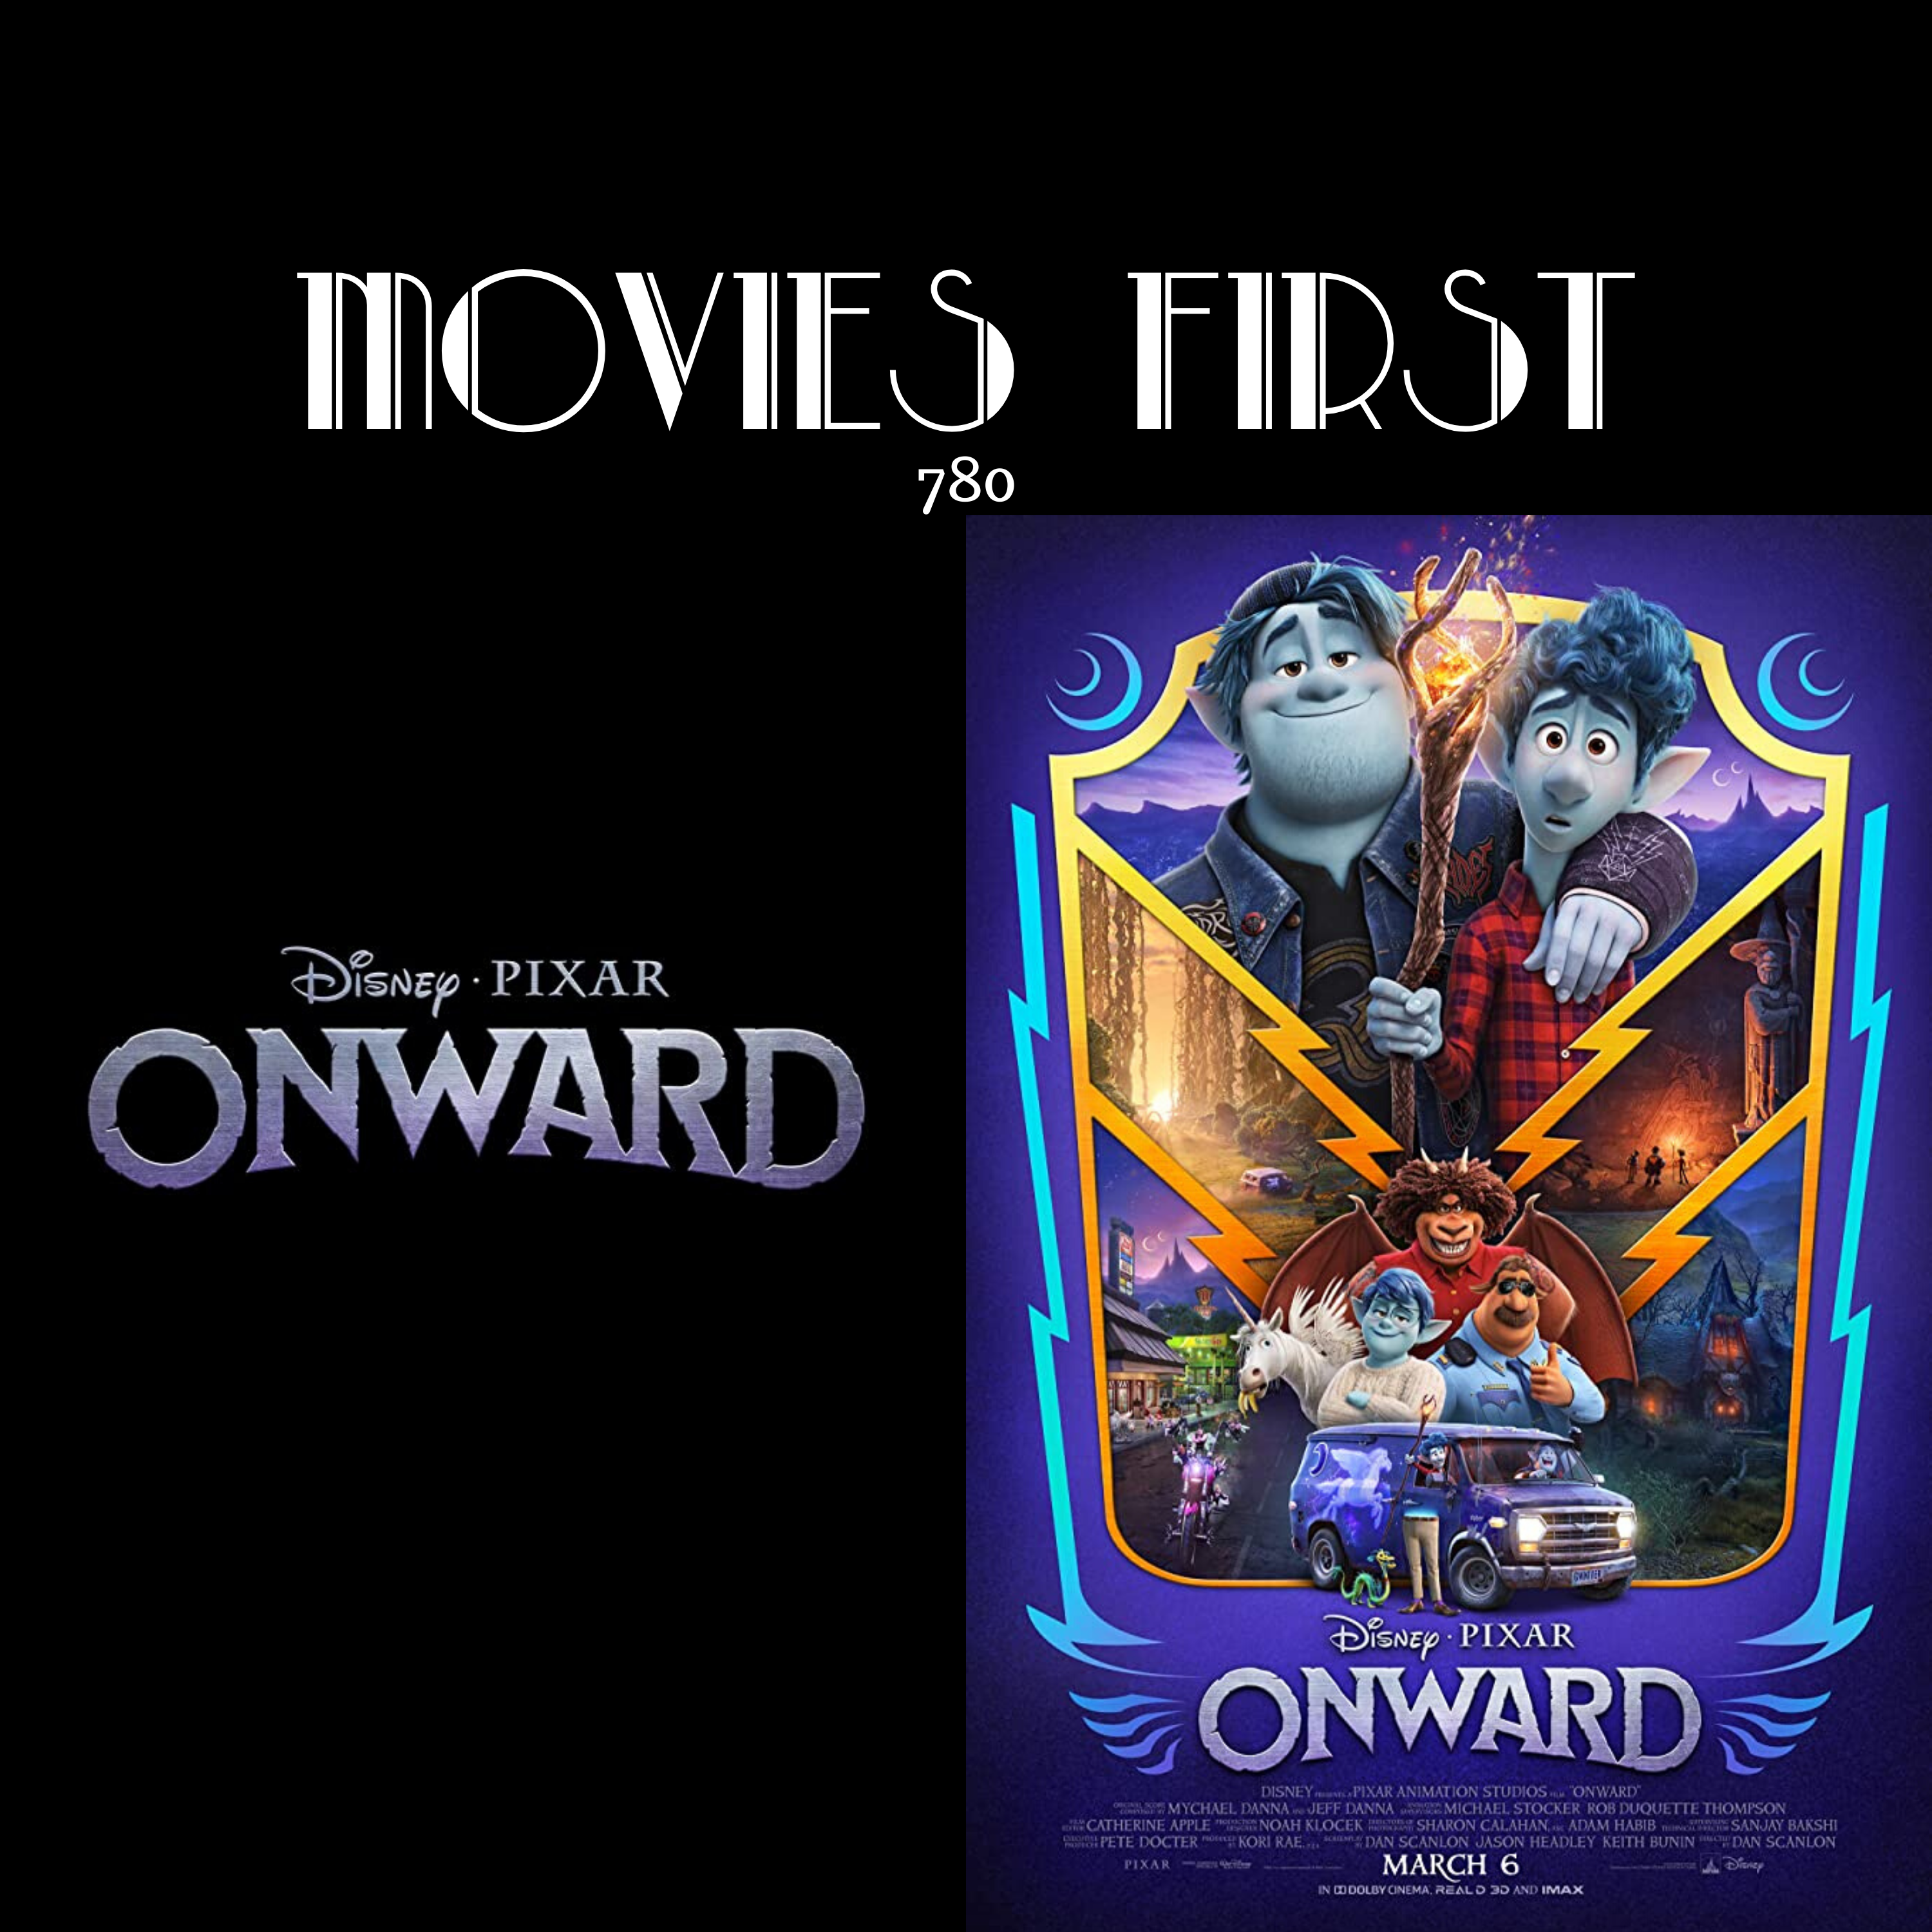 Onward (Animation, Adventure, Comedy) (the @MoviesFirst review)